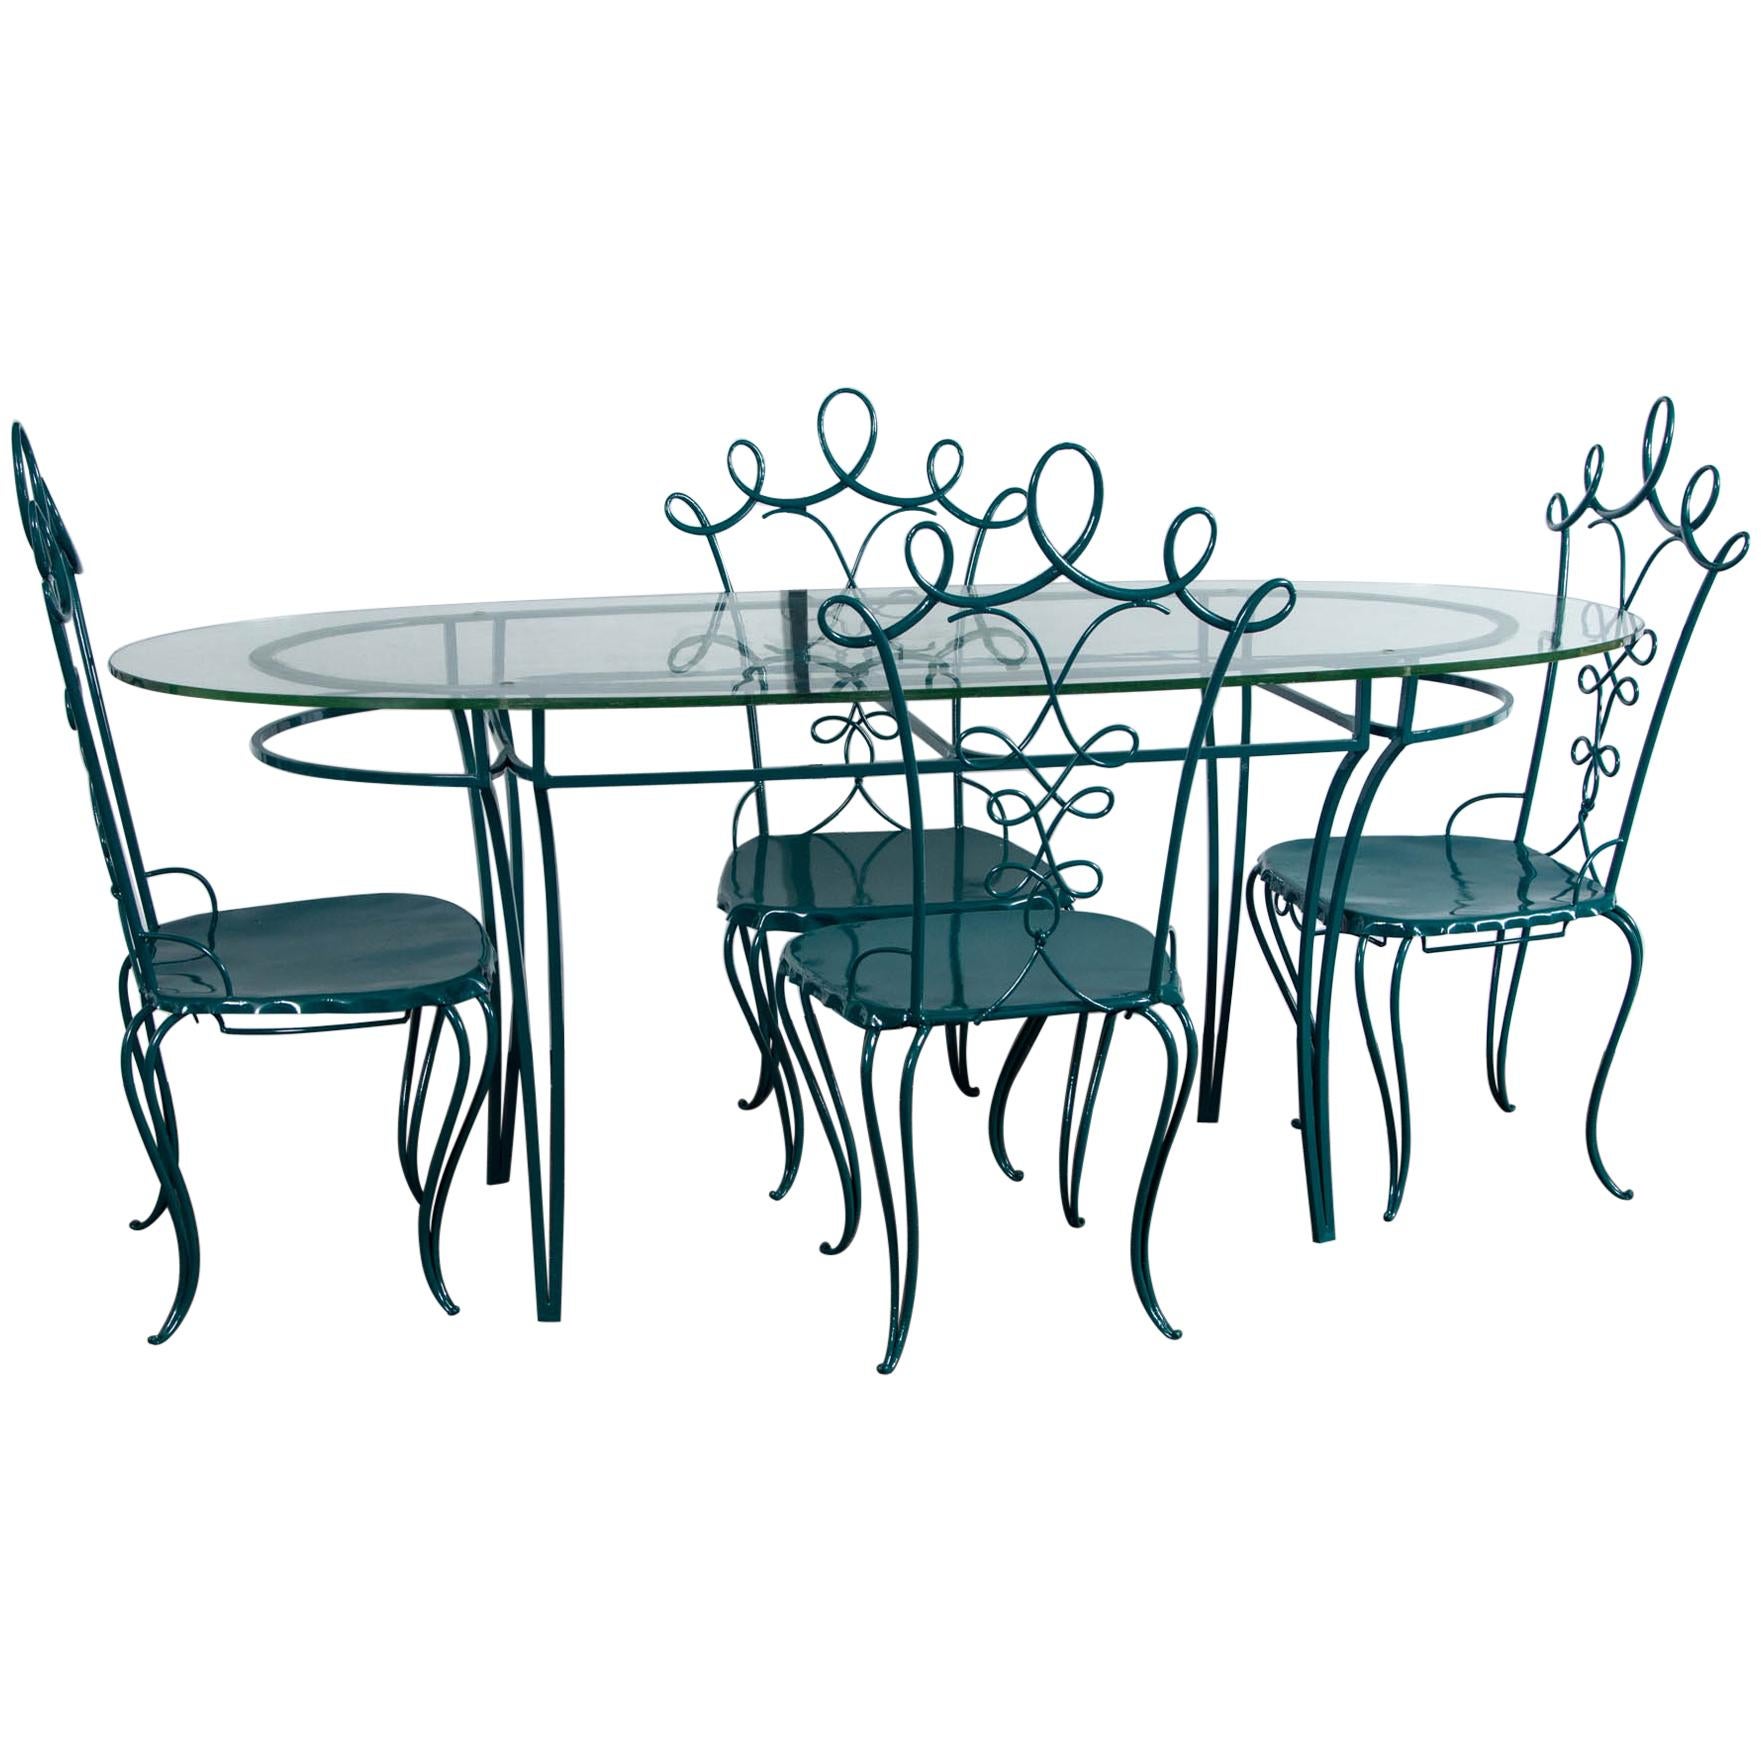 French Garden Table with Four Chairs After René Prou